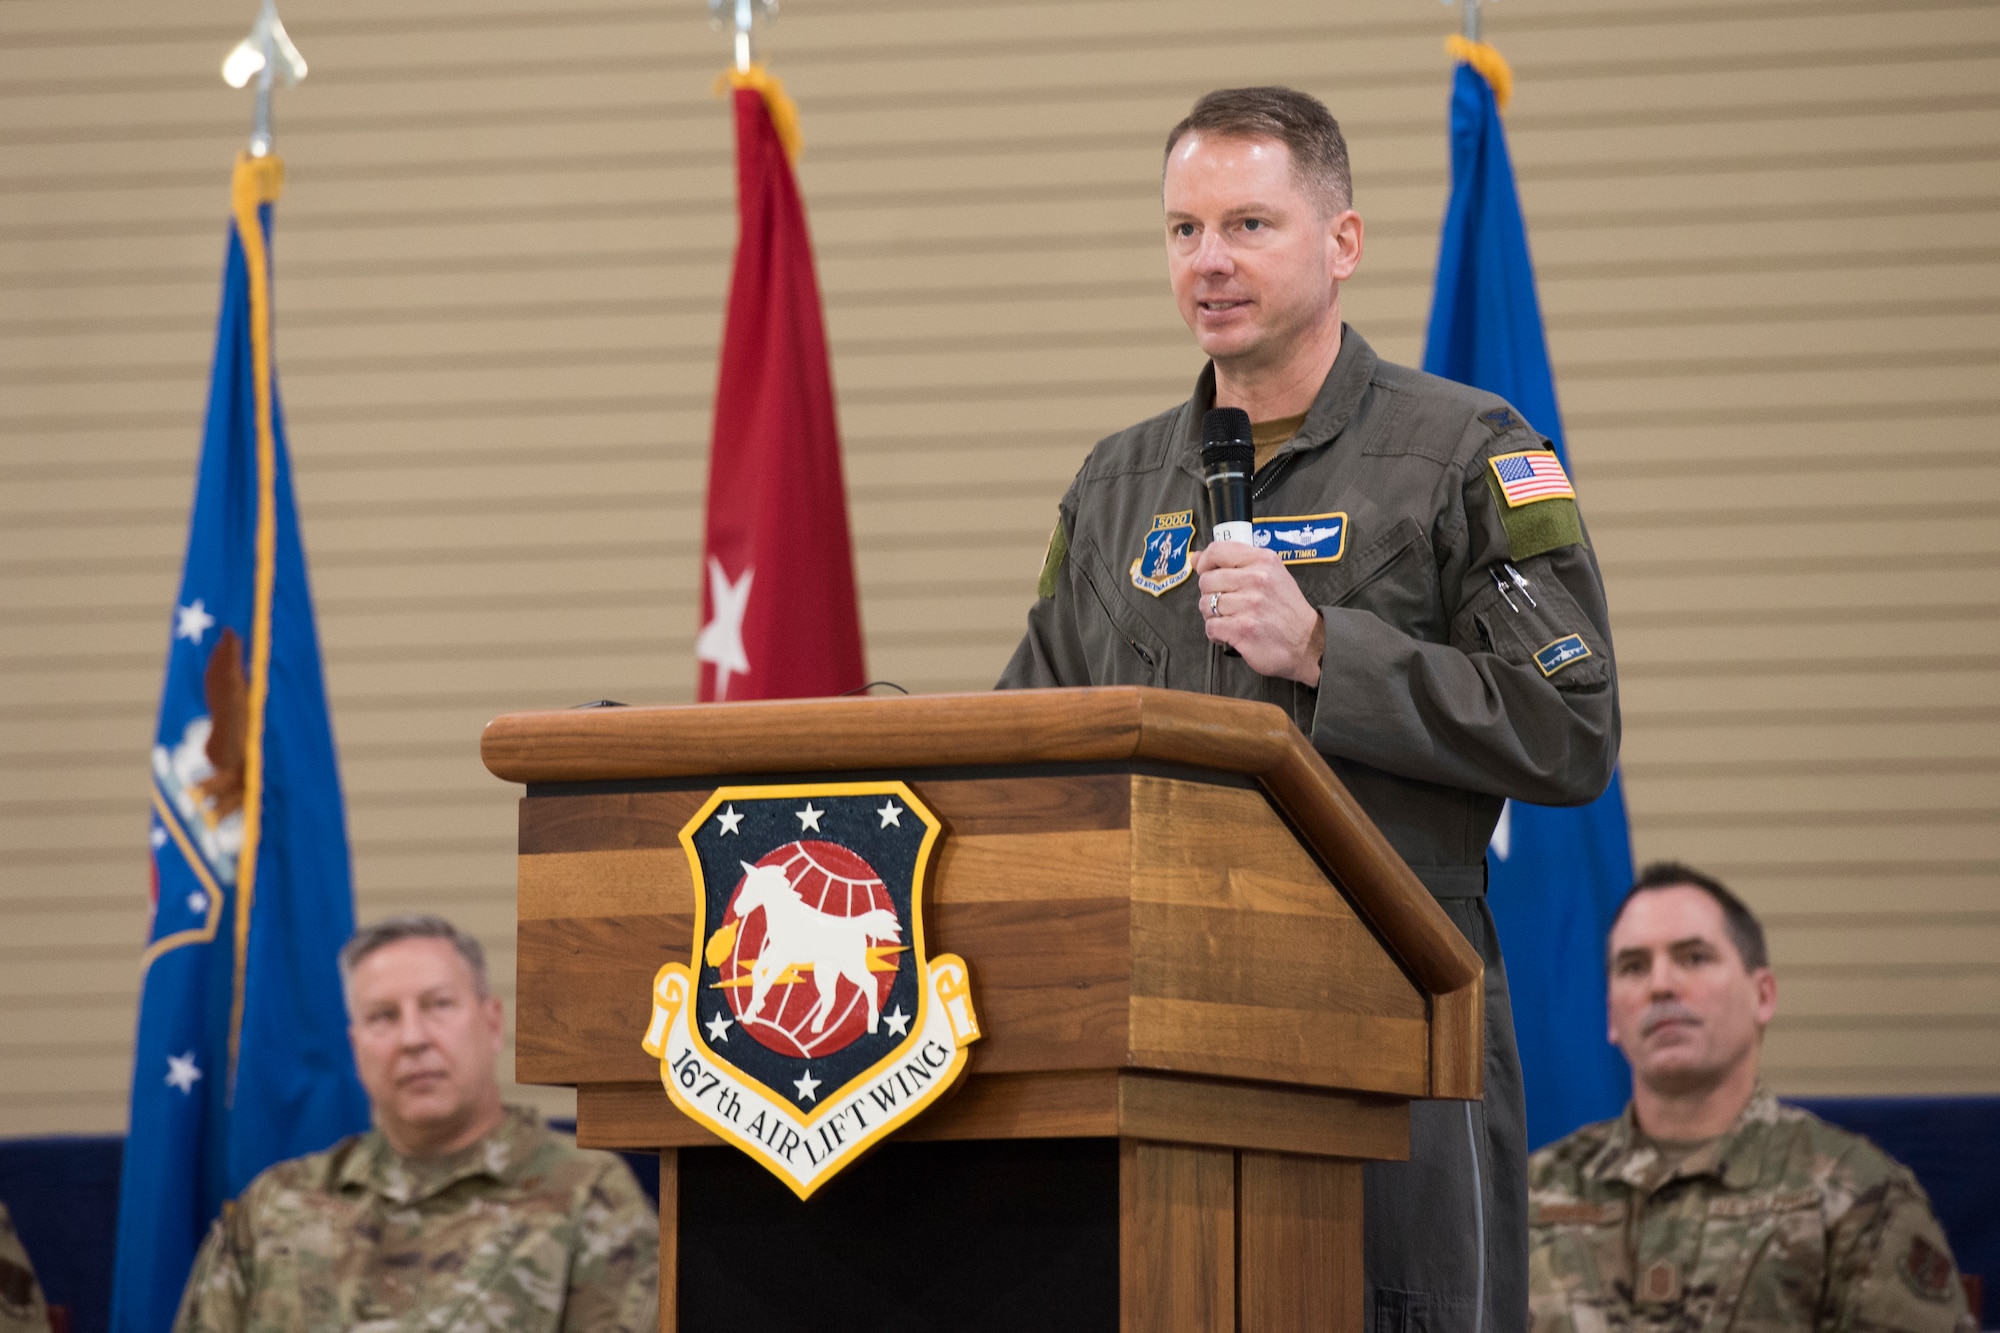 Col. Martin Timko addresses members of the 167th Airlift Wing, West Virginia Air National Guard, during a change of command ceremony, Jan. 12, 2020. Timko assumed command of the wing, Col. David Cochran relinquished command during the ceremony.